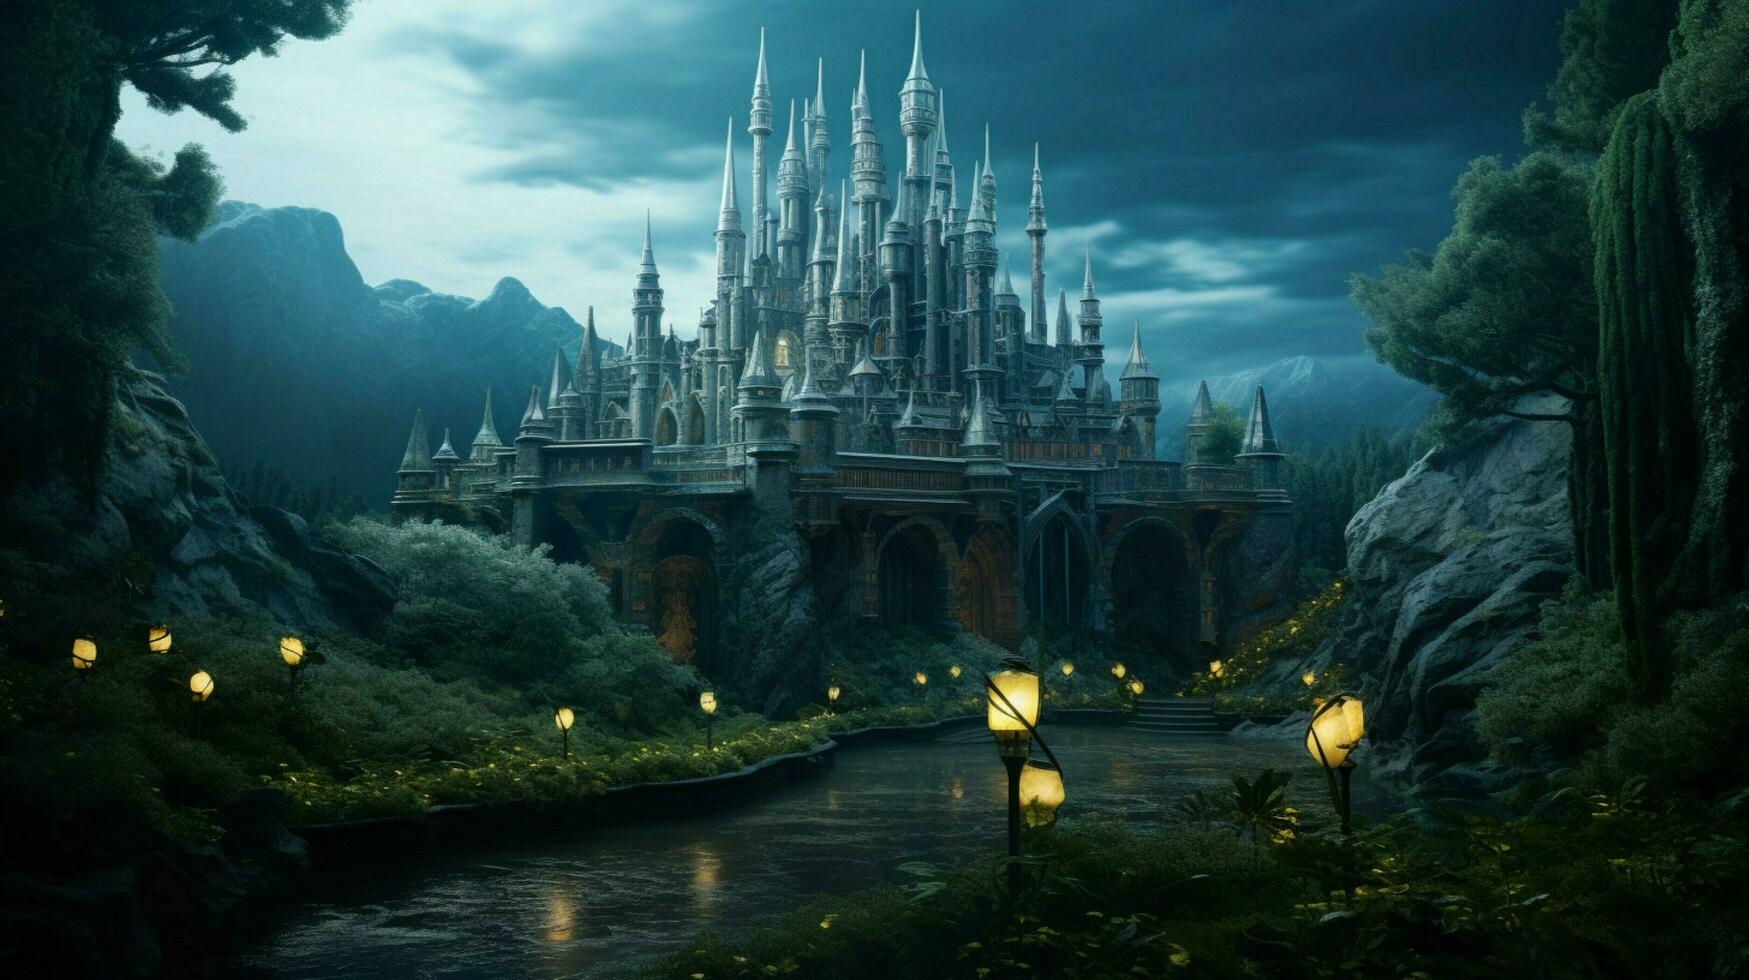 A futuristic elven castle in a magical forest photo